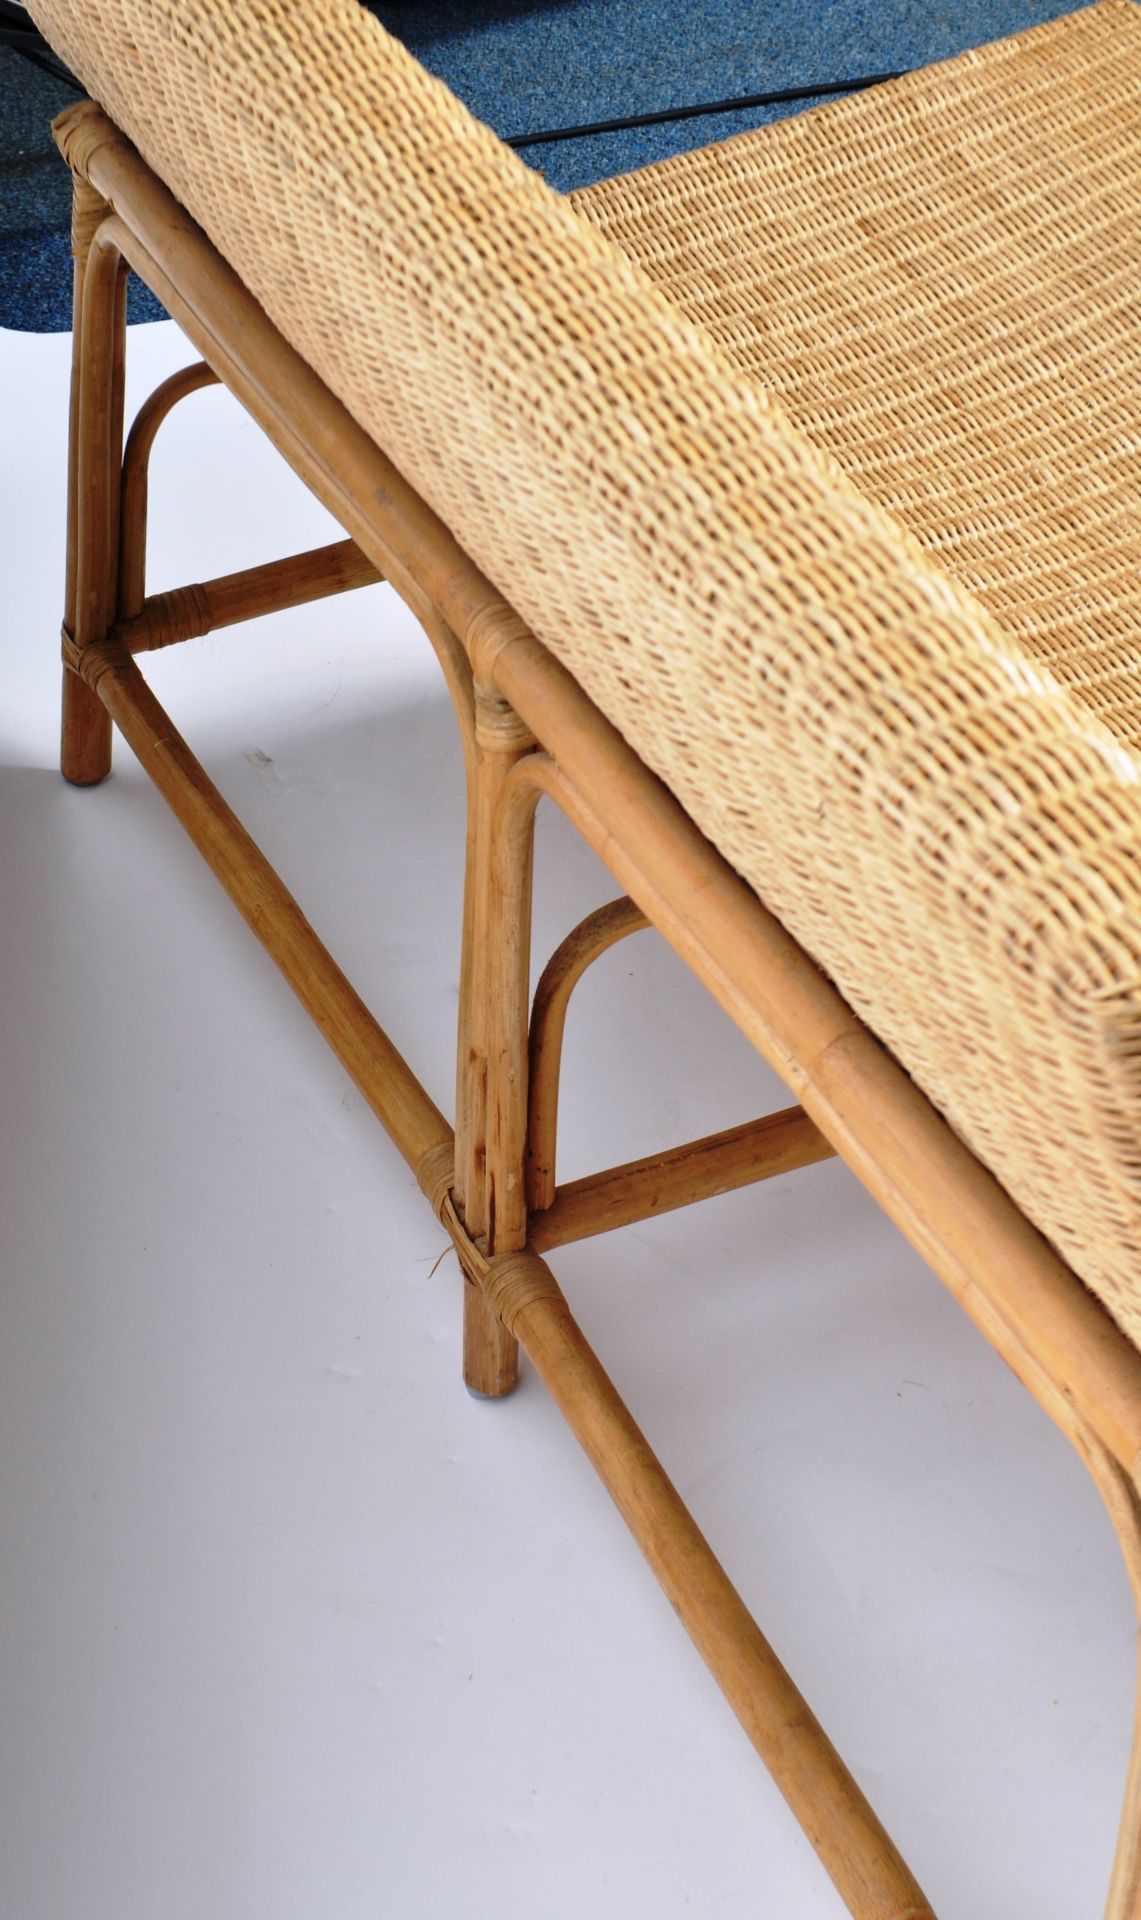 RETRO WICKER / CANE AND BAMBOO BENCH / LOUNGE SOFA CHAIR - Image 7 of 7